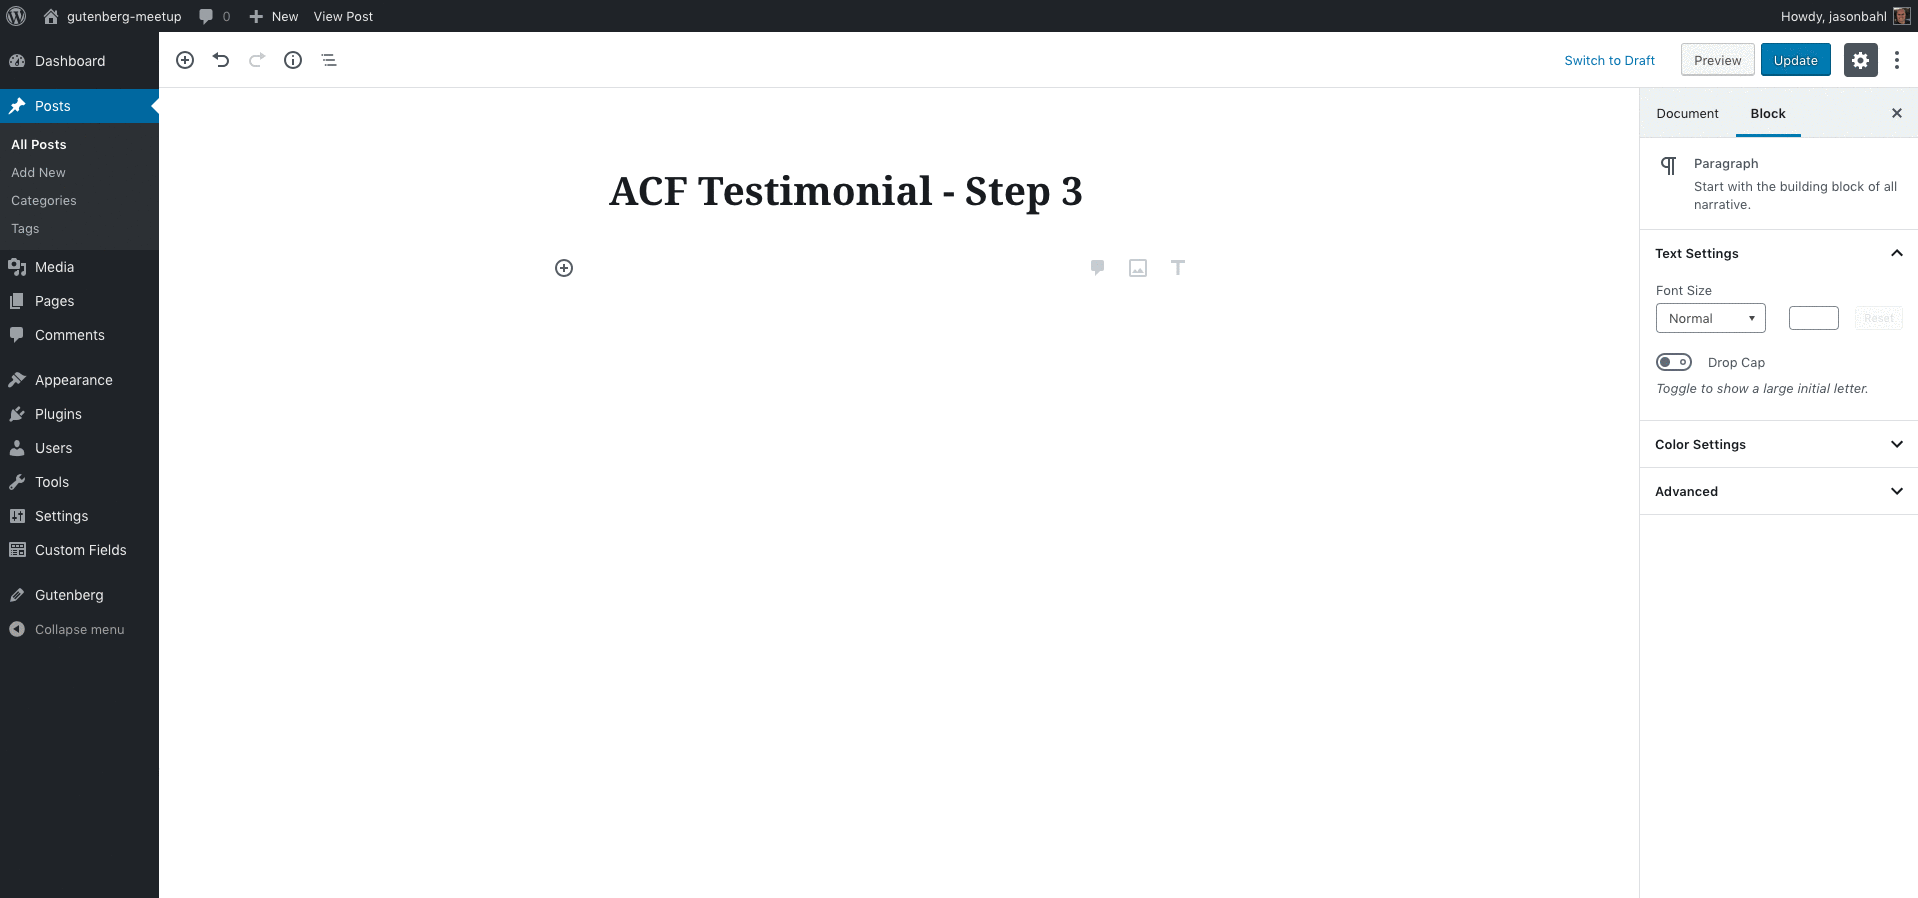 A gif showing a demo of the Gutenberg editor in WordPress, built using ACF